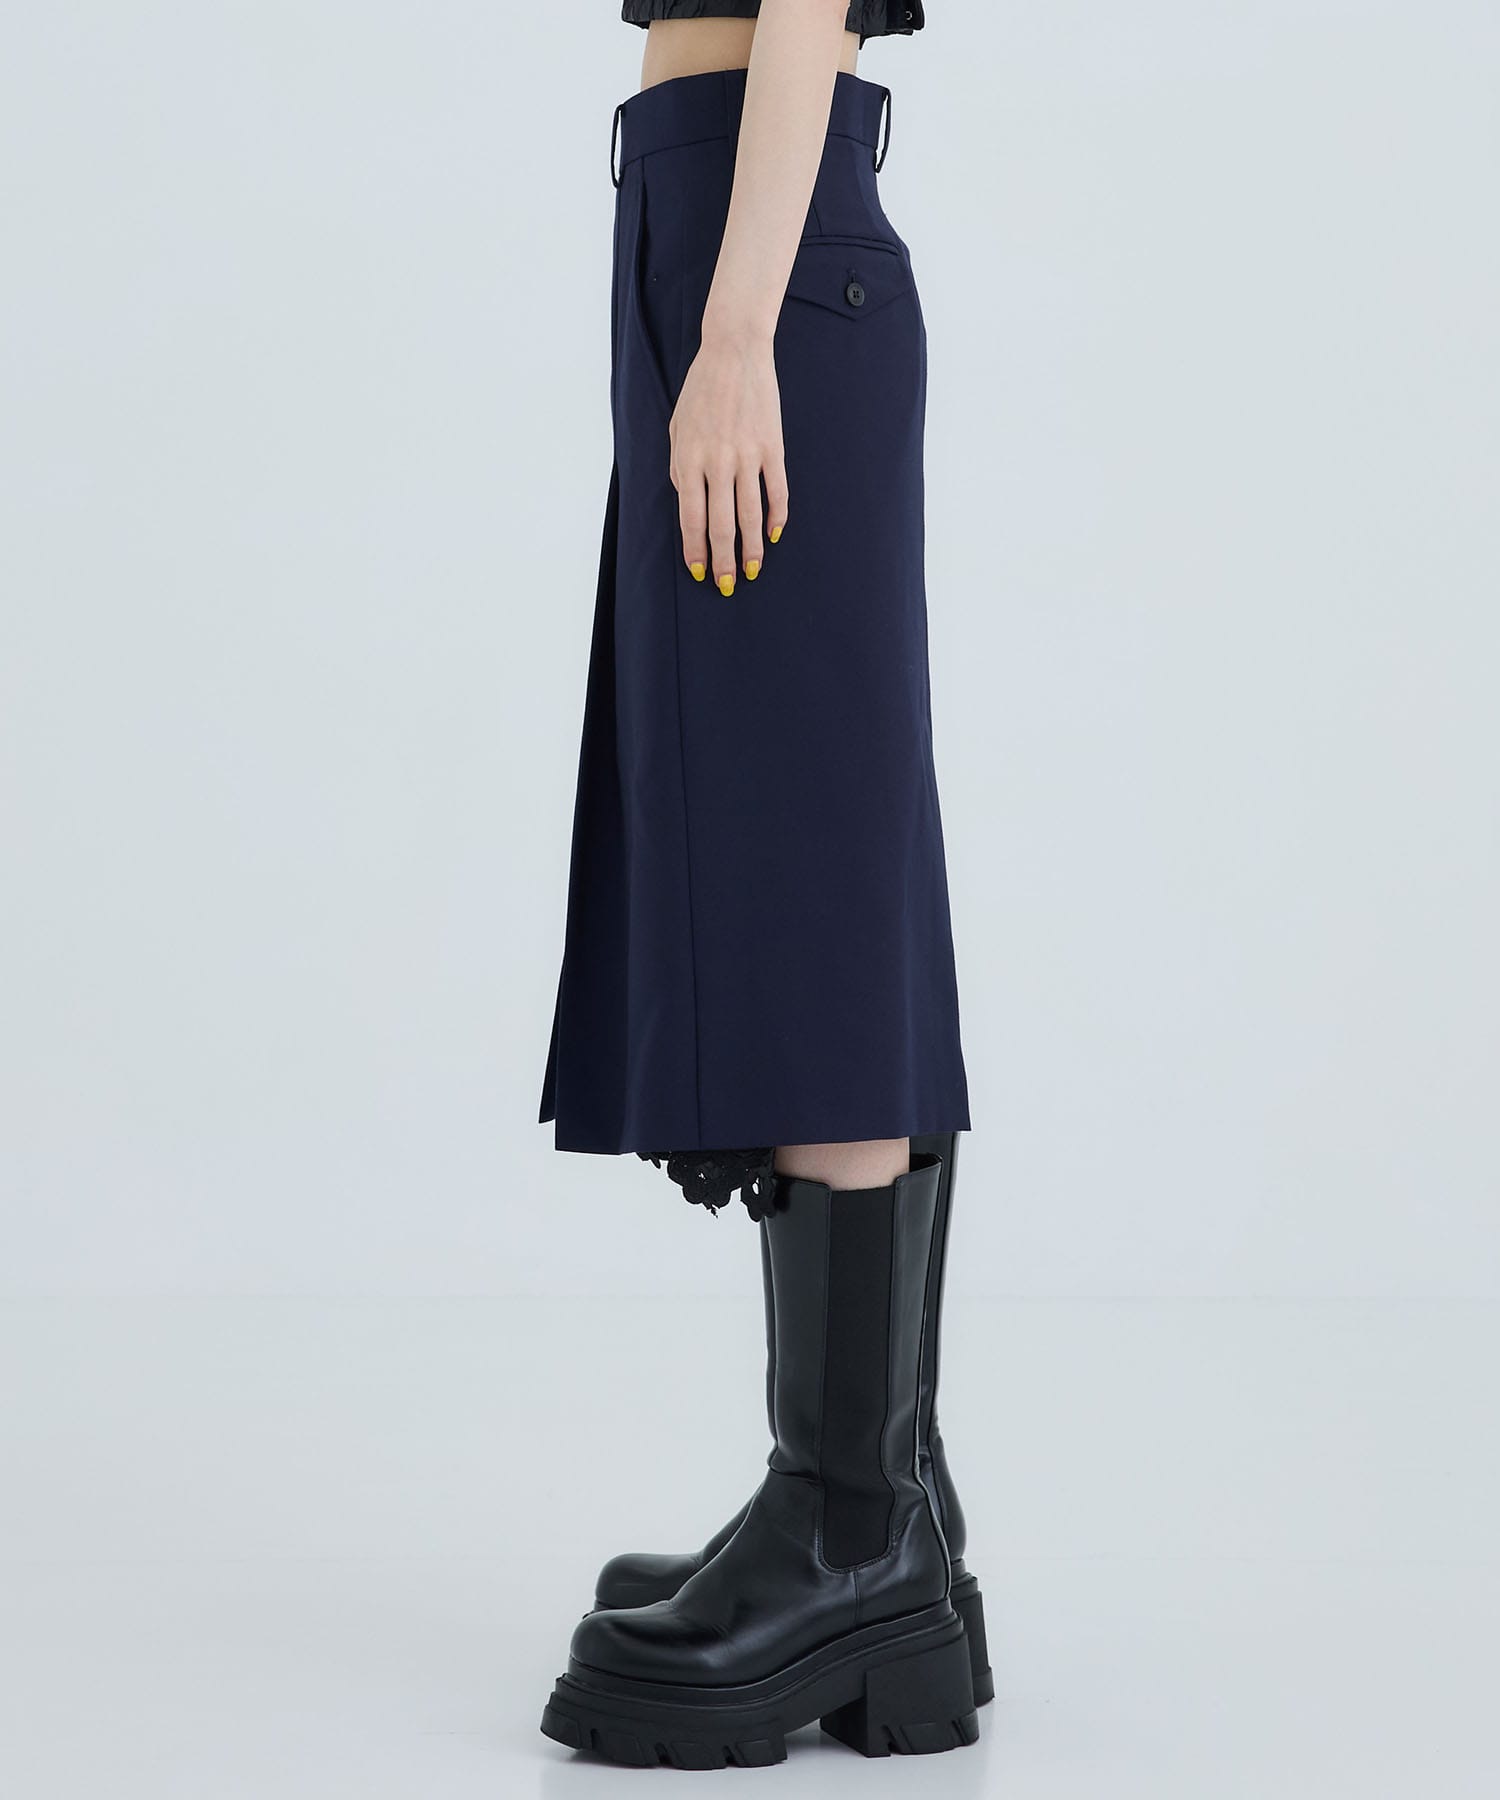 OX lace skirt(36 NAVY): TOGA PULLA: WOMENS｜ STUDIOUS ONLINE公式通販サイト